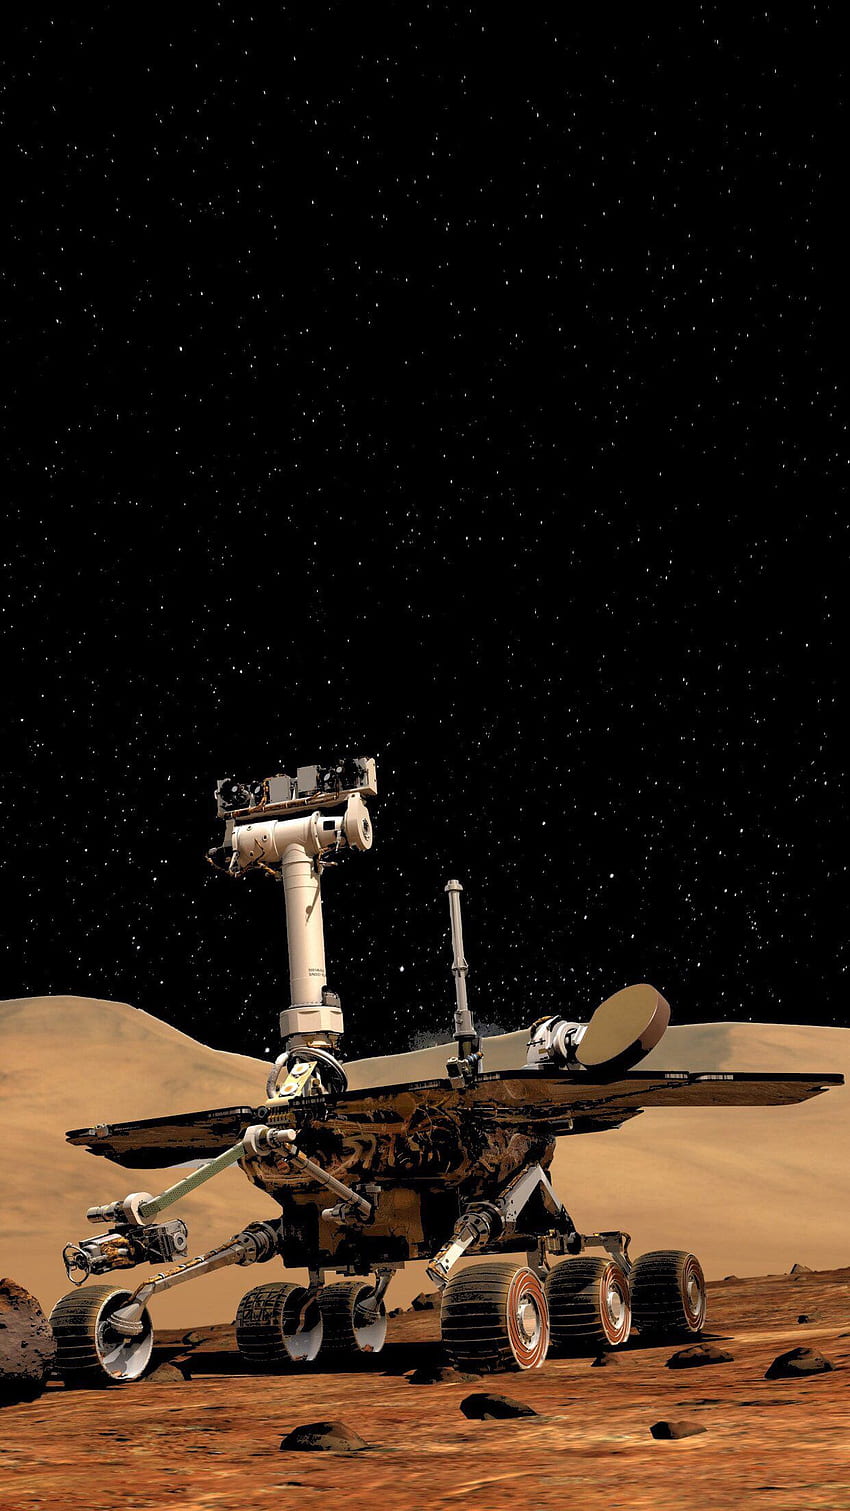 I made an Oledified Opportunity Mars Rover phone HD phone wallpaper